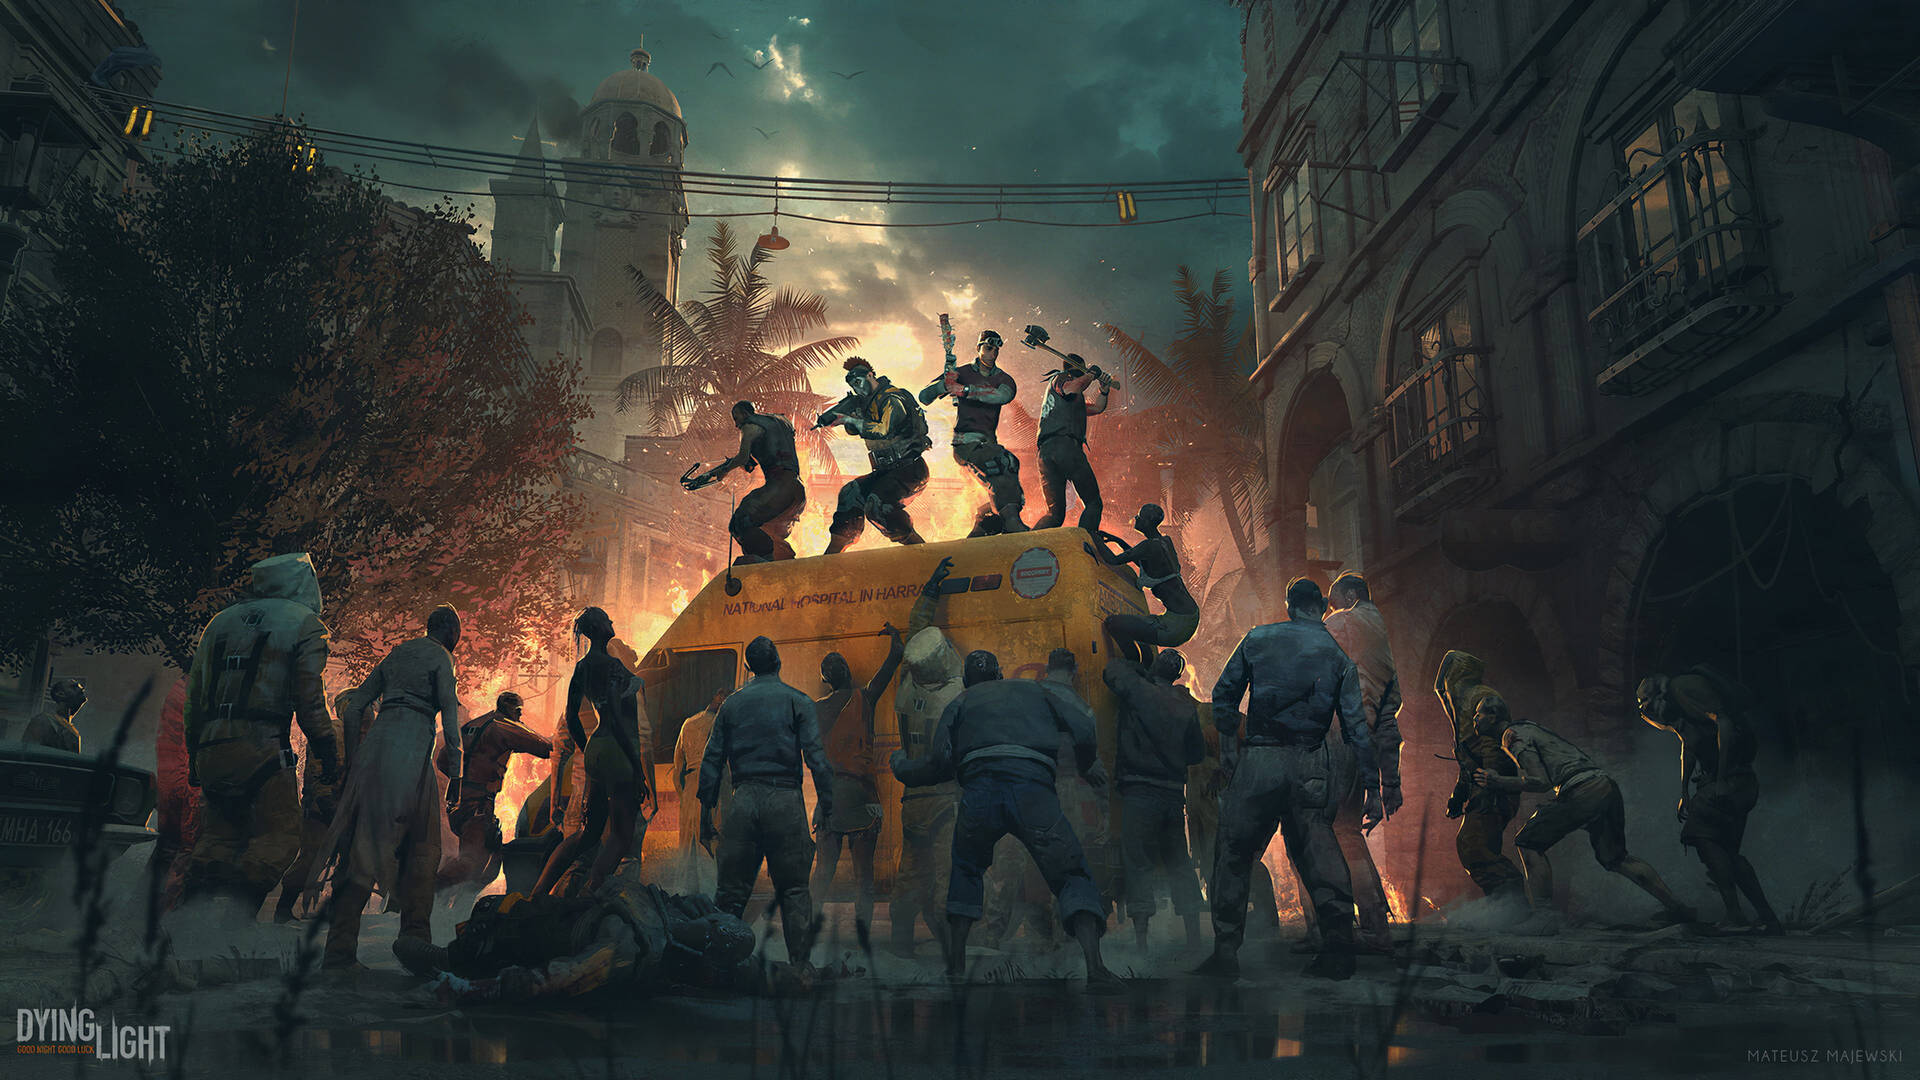 Caption: Thrilling Encounter In Dying Light 2 Cityscape